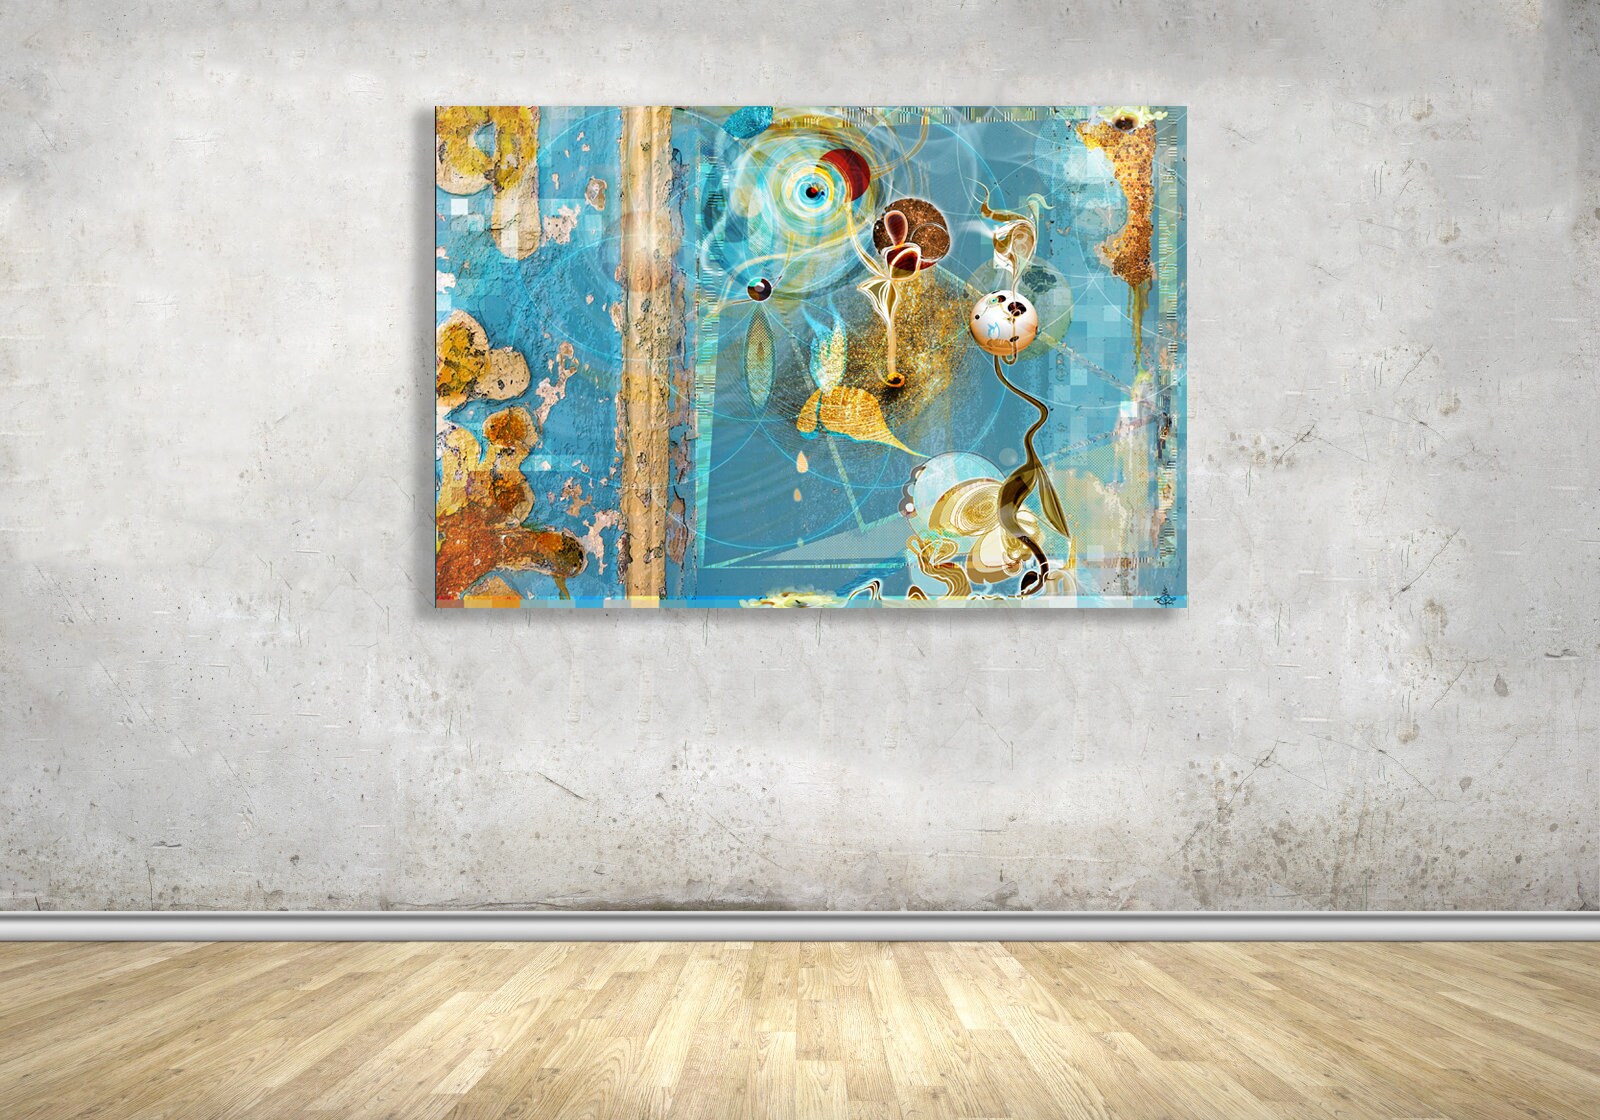 Custommade Variations Analogital Mischtechnik Art in Painting and Print on Canvas Gelee Royale